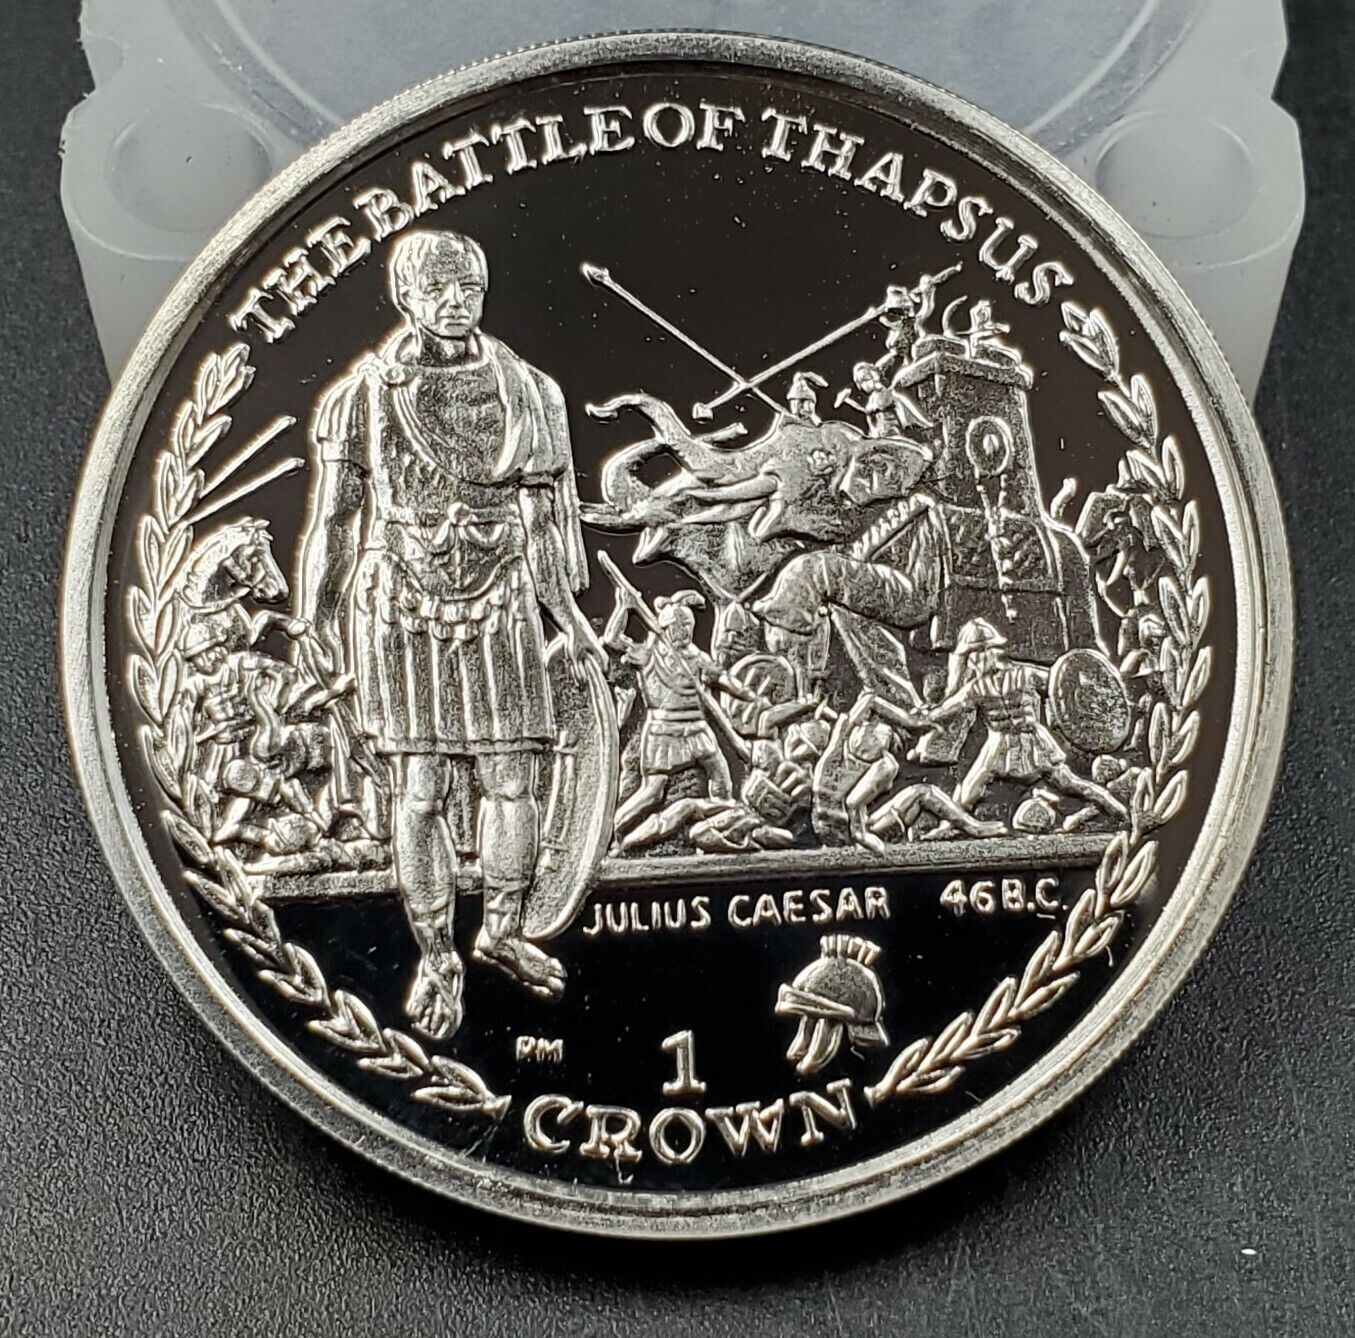 2006 Pobjoy Mint Isle of Man Silver Crown Gem Proof BATTLE OF THAPSUS CEASAR